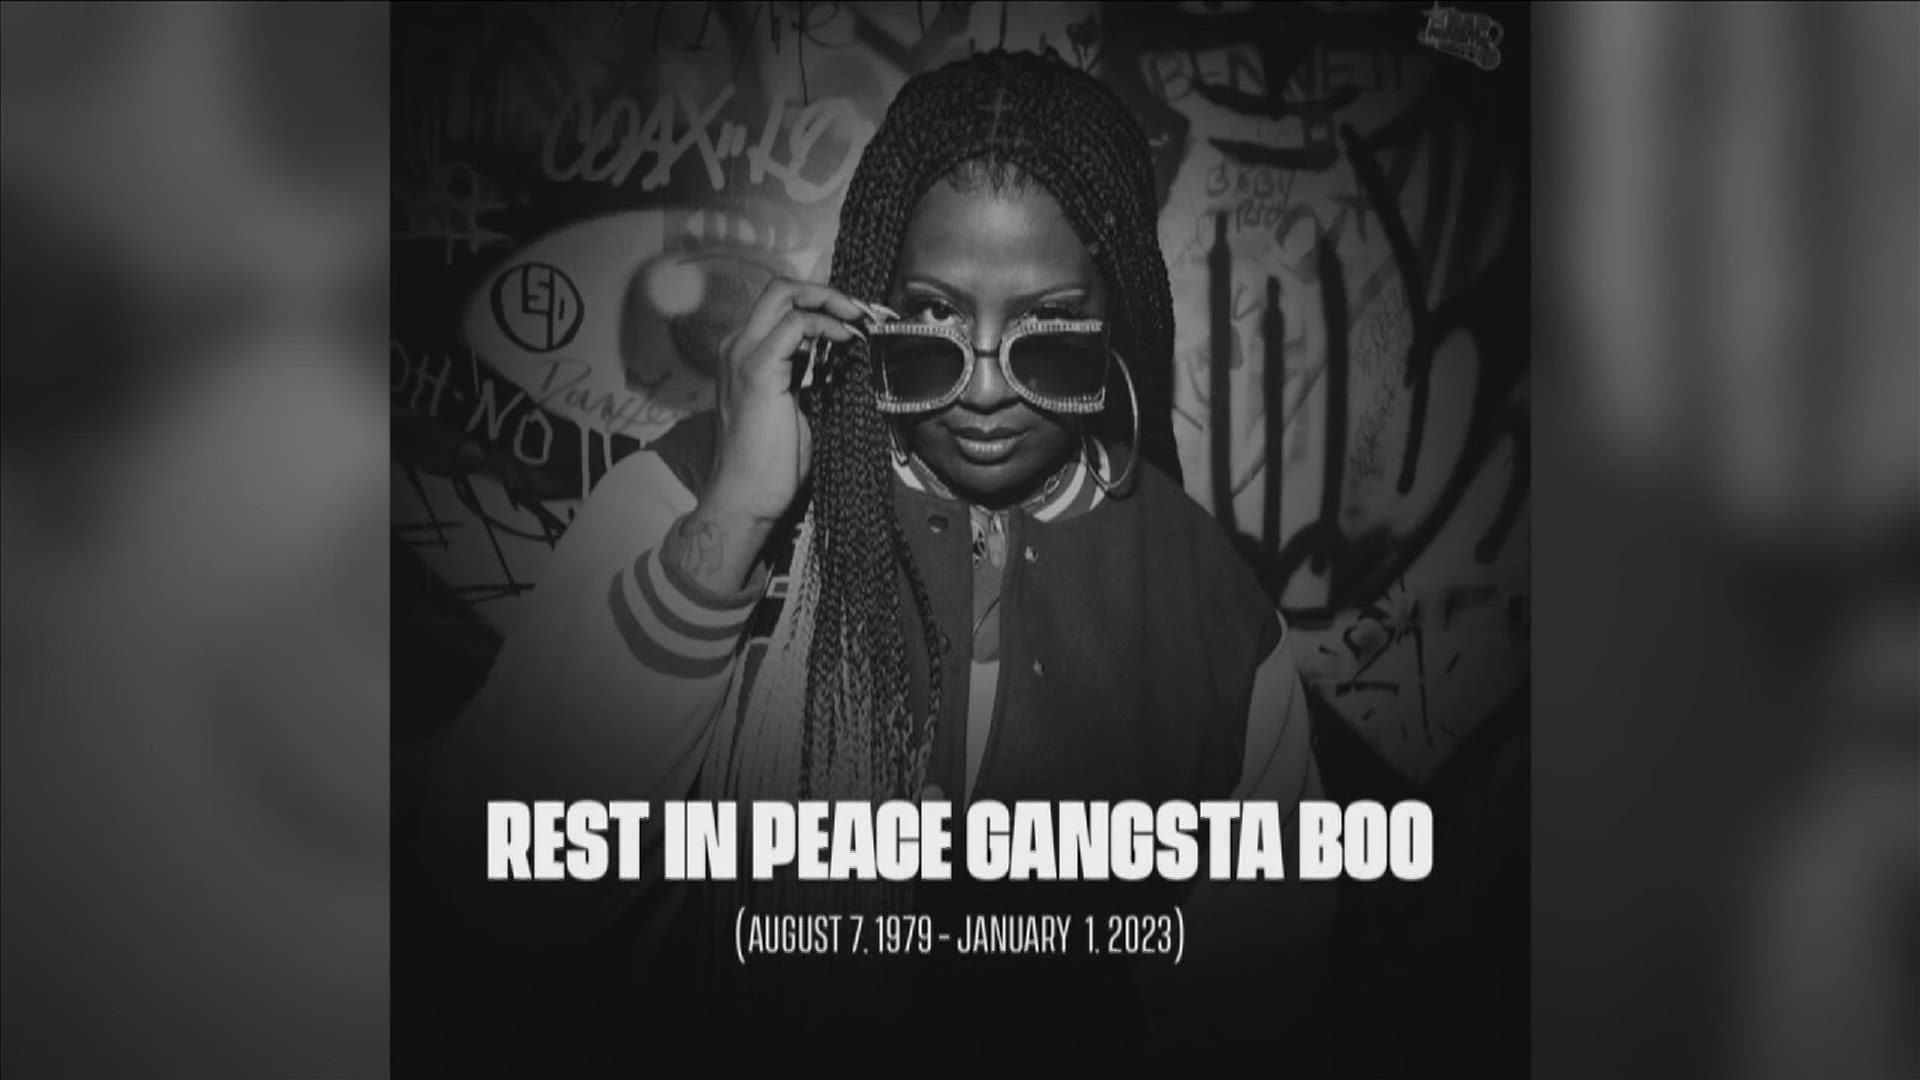 Gangsta Boo was a trailblazer, and she paved the way for several women of female rap. Her loved ones remember her as one who never lost sight of her love for Memphis